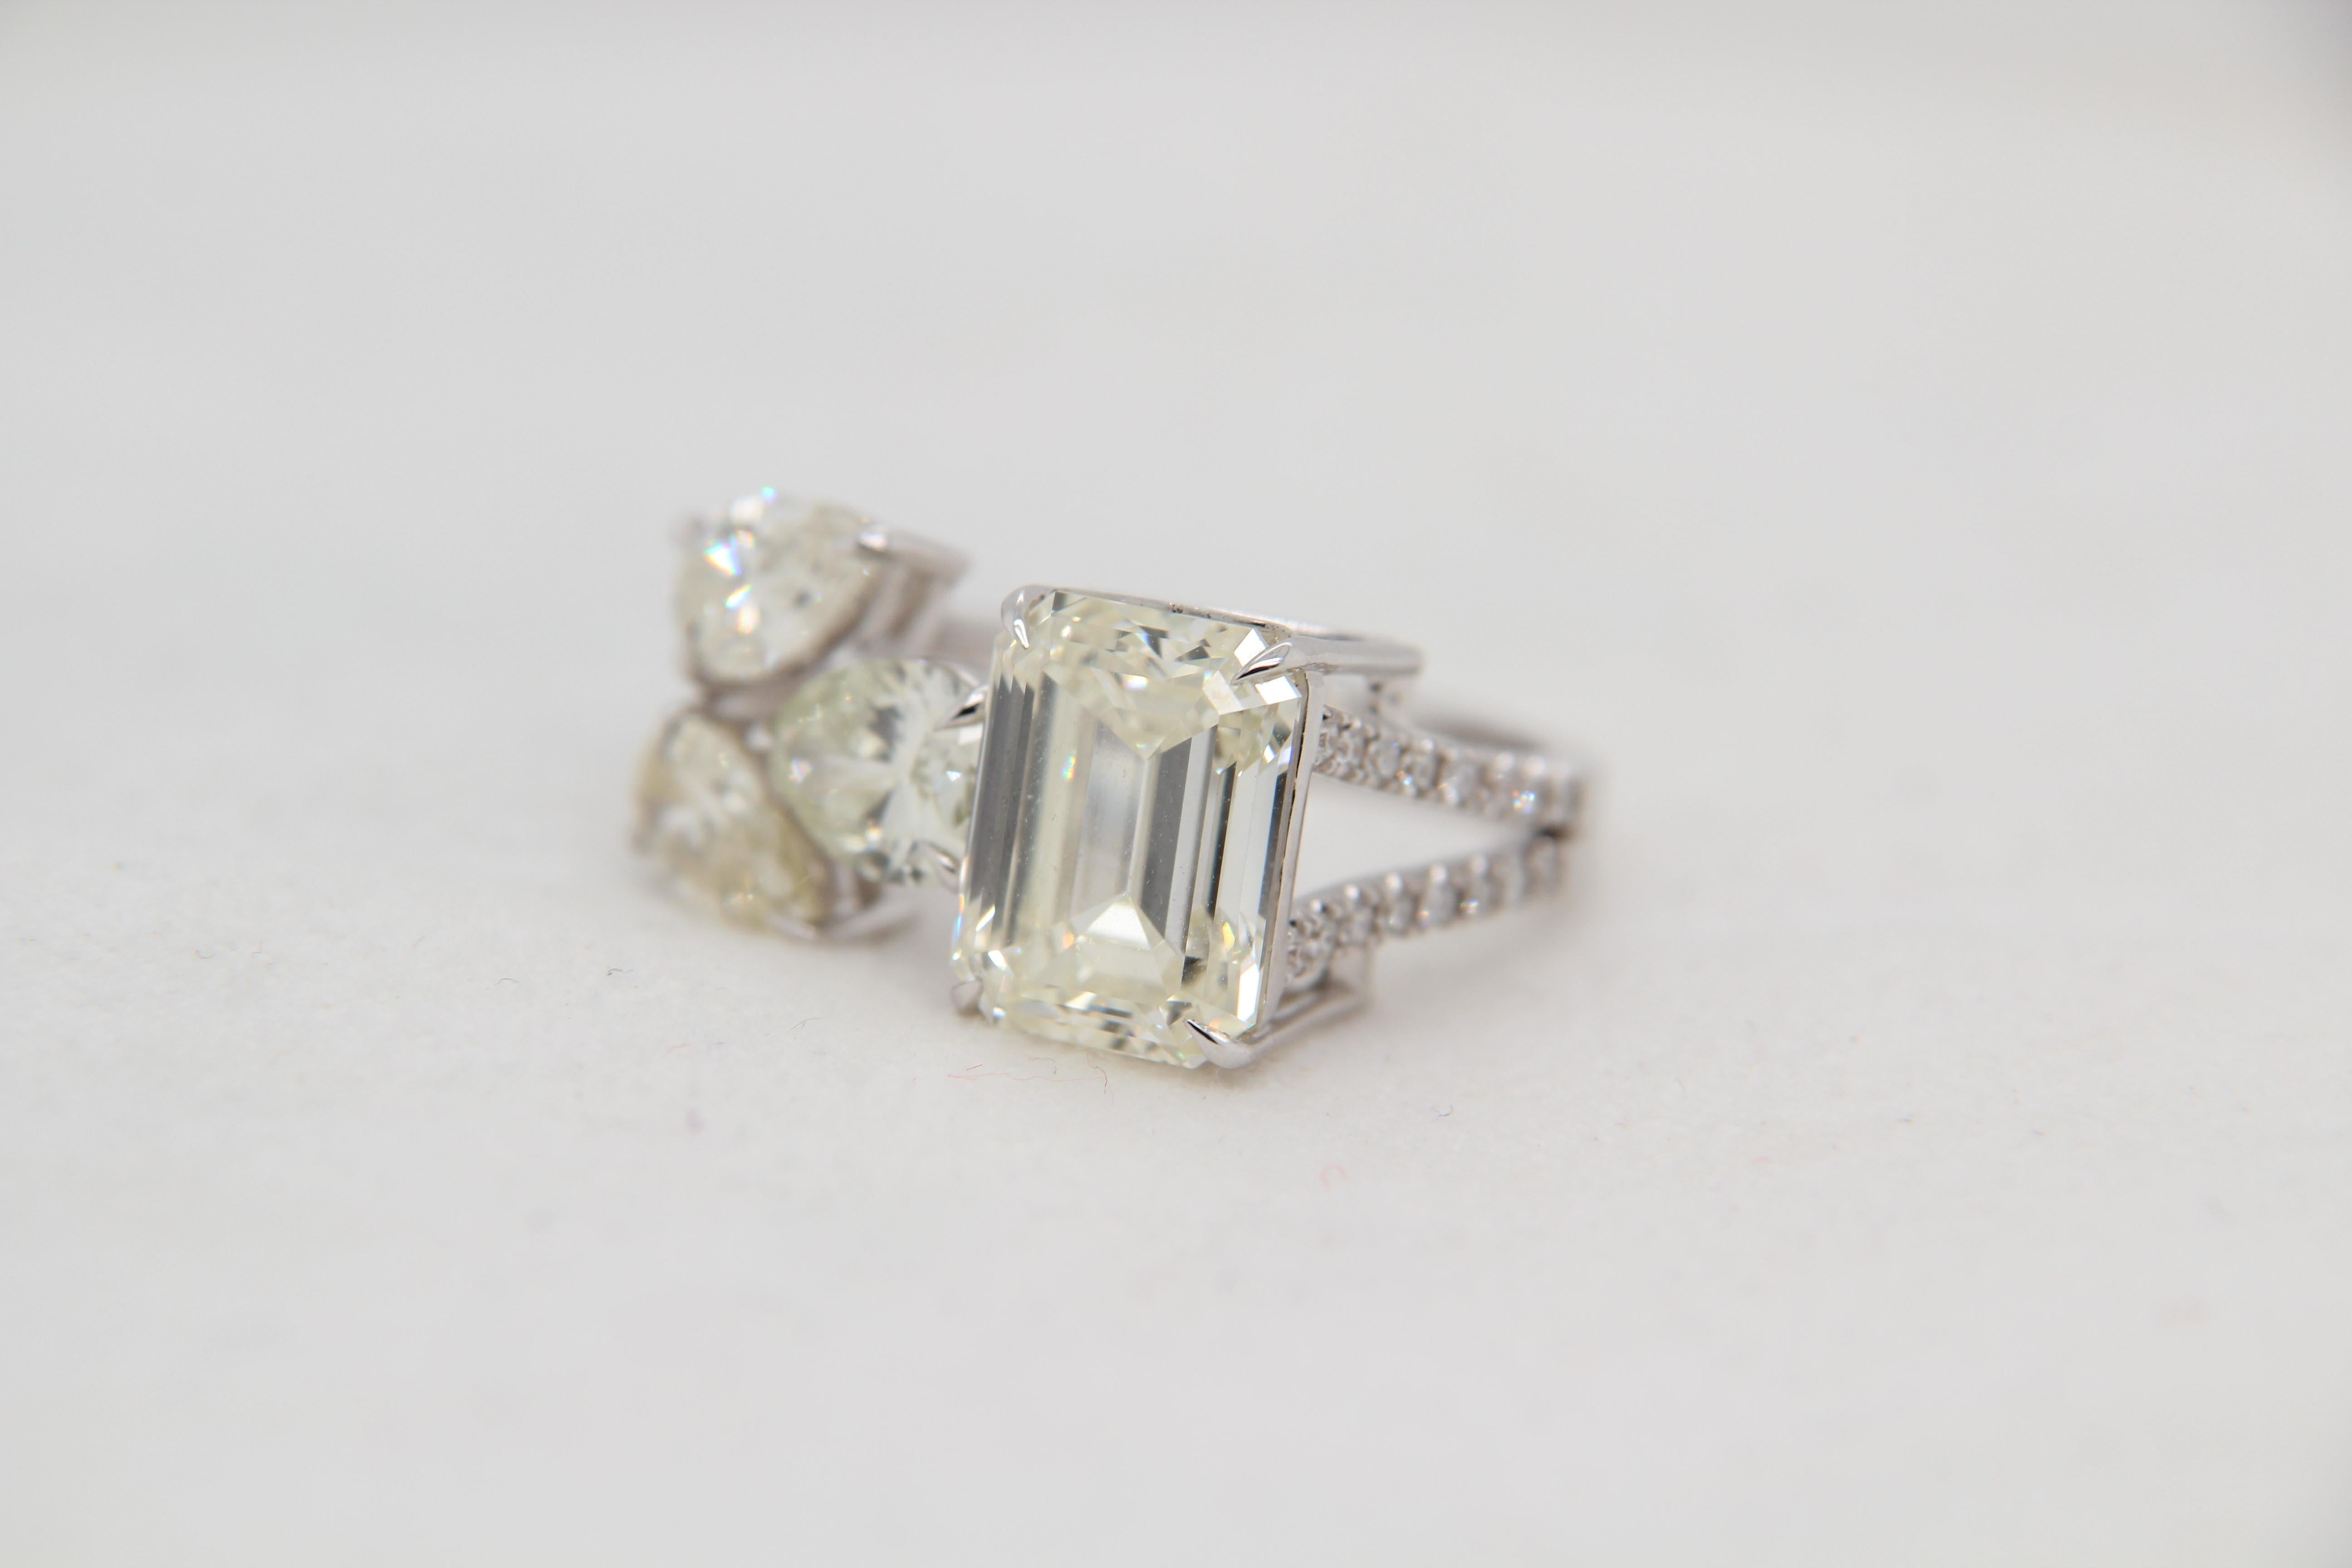 A new emerald cut and pear shape diamond ring. The emerald cut diamond weighs 5.18 carat and the 3 pear shapes weigh 2.38 carat. There are round diamonds along the top half of the band weighing at 0.24 carat. The total weight of the ring is 7.30